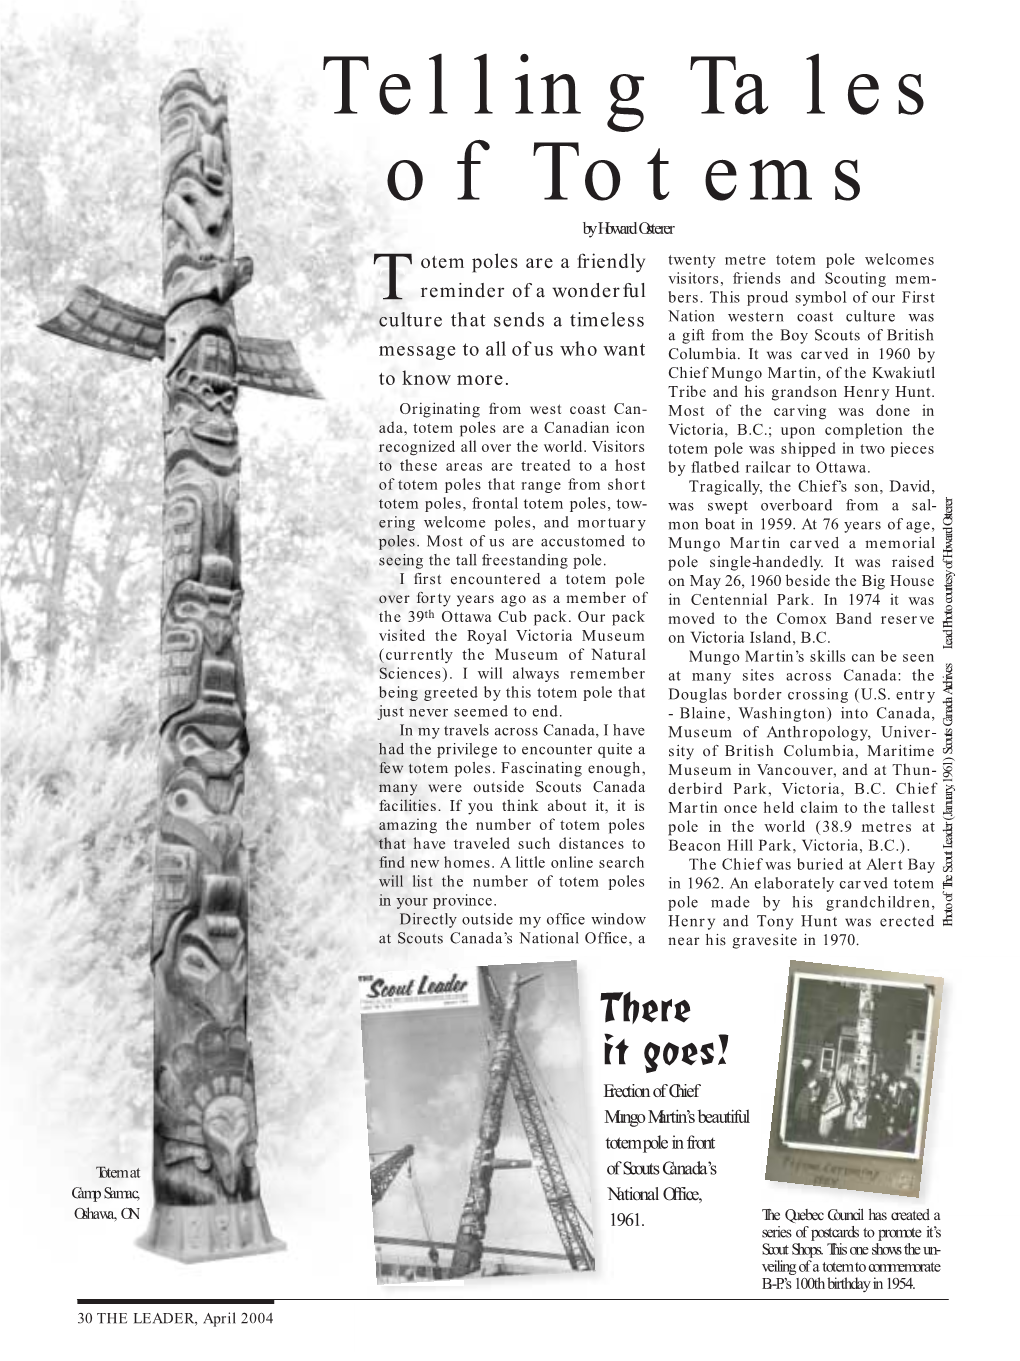 Telling Tales of Totems